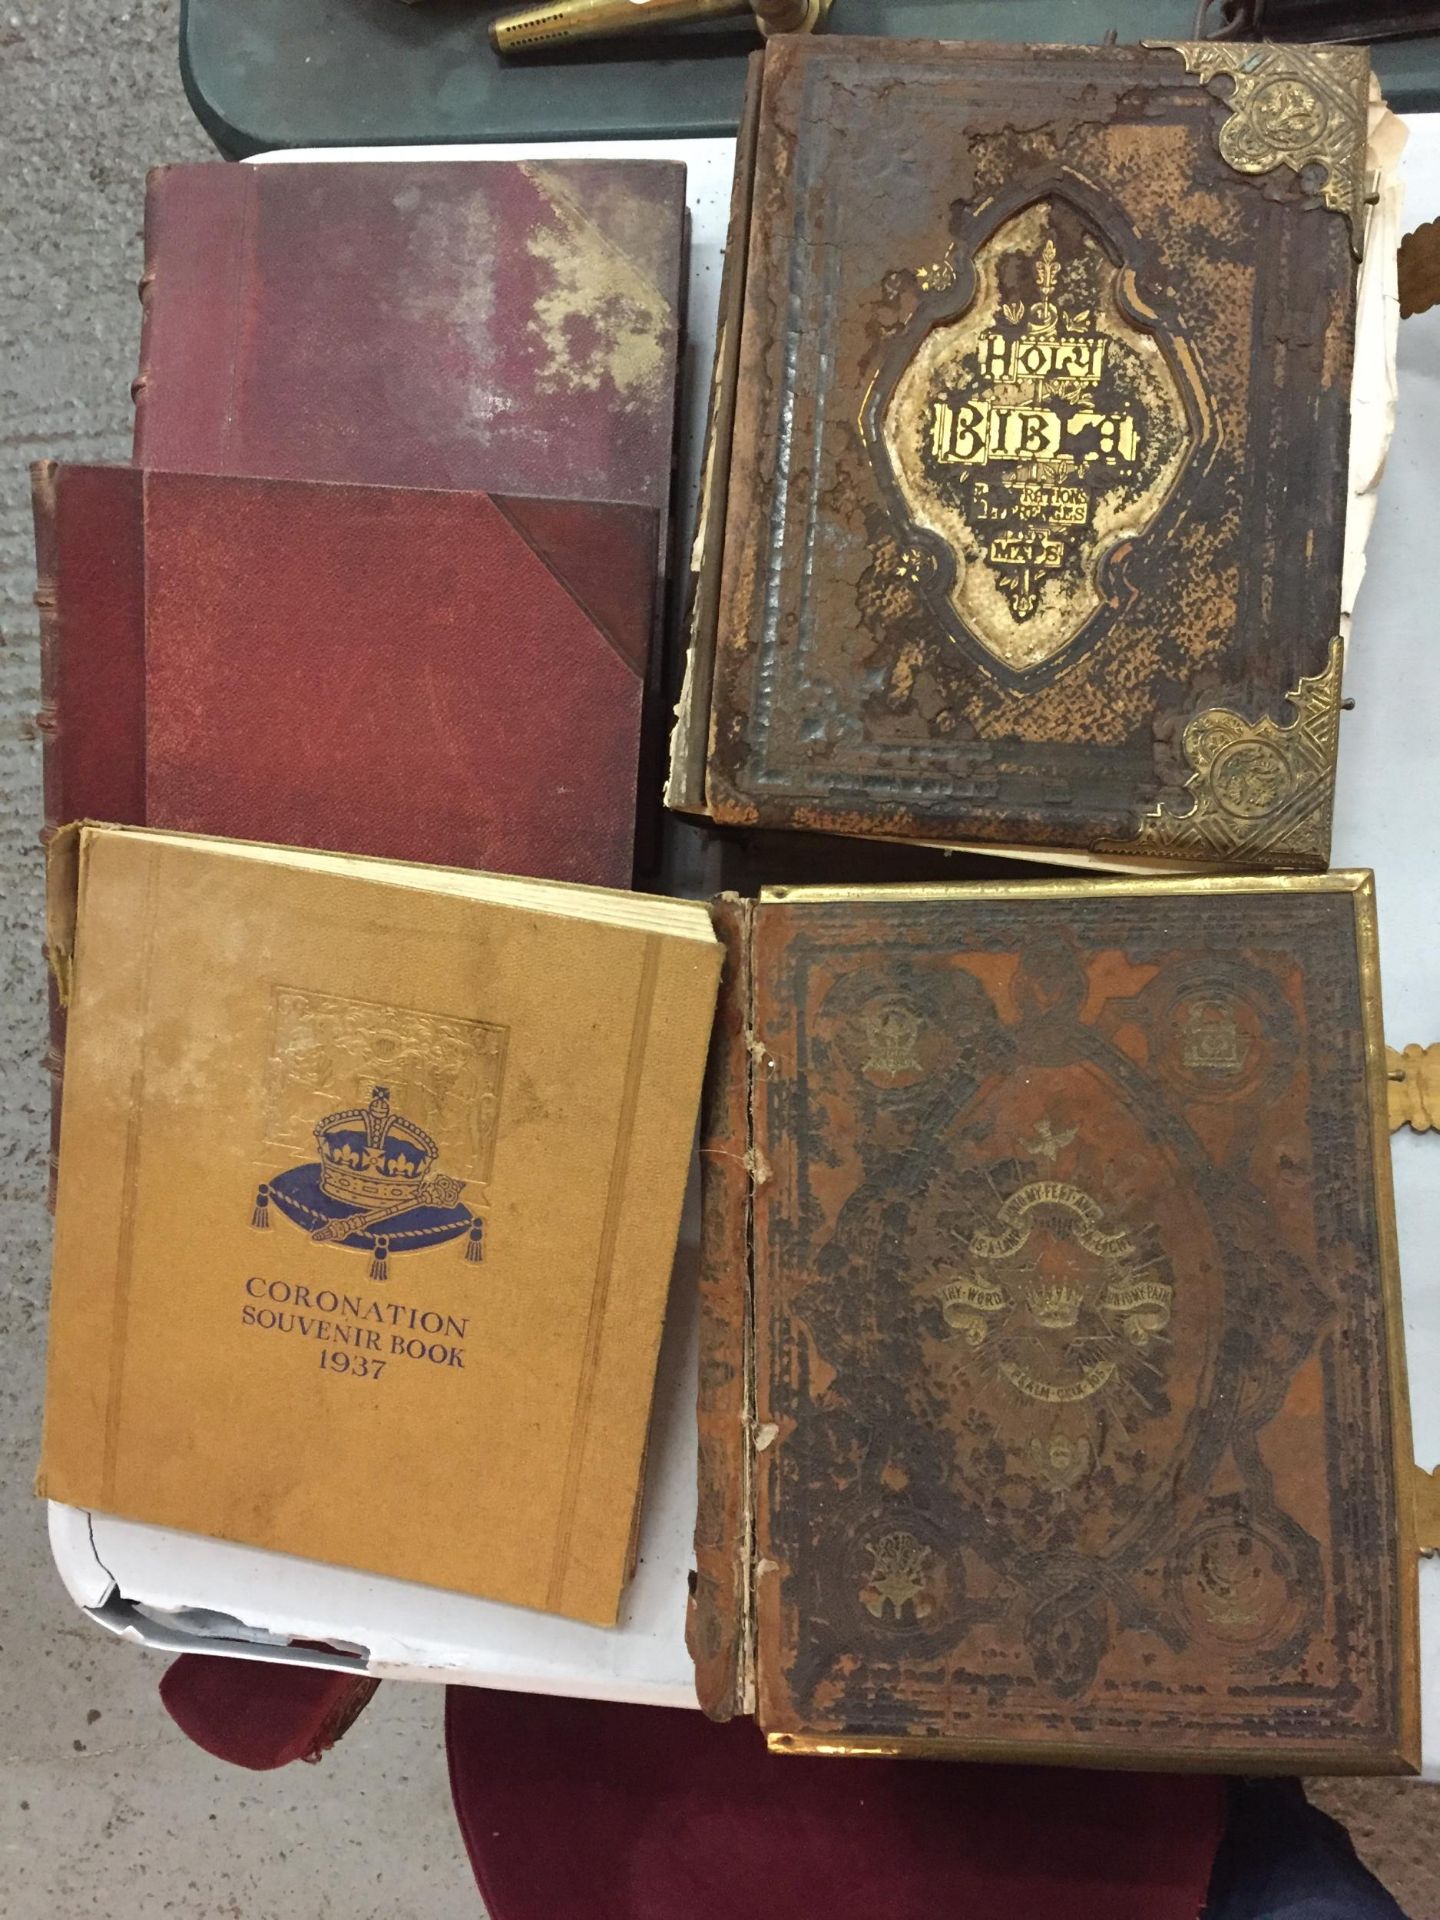 A COLLECTION OF FIVE BOOKS TO INCLUDE TWO LARGE BRASS BOUND OLD LEATHER BIBLES, VOLUMES 1 & 2 OF